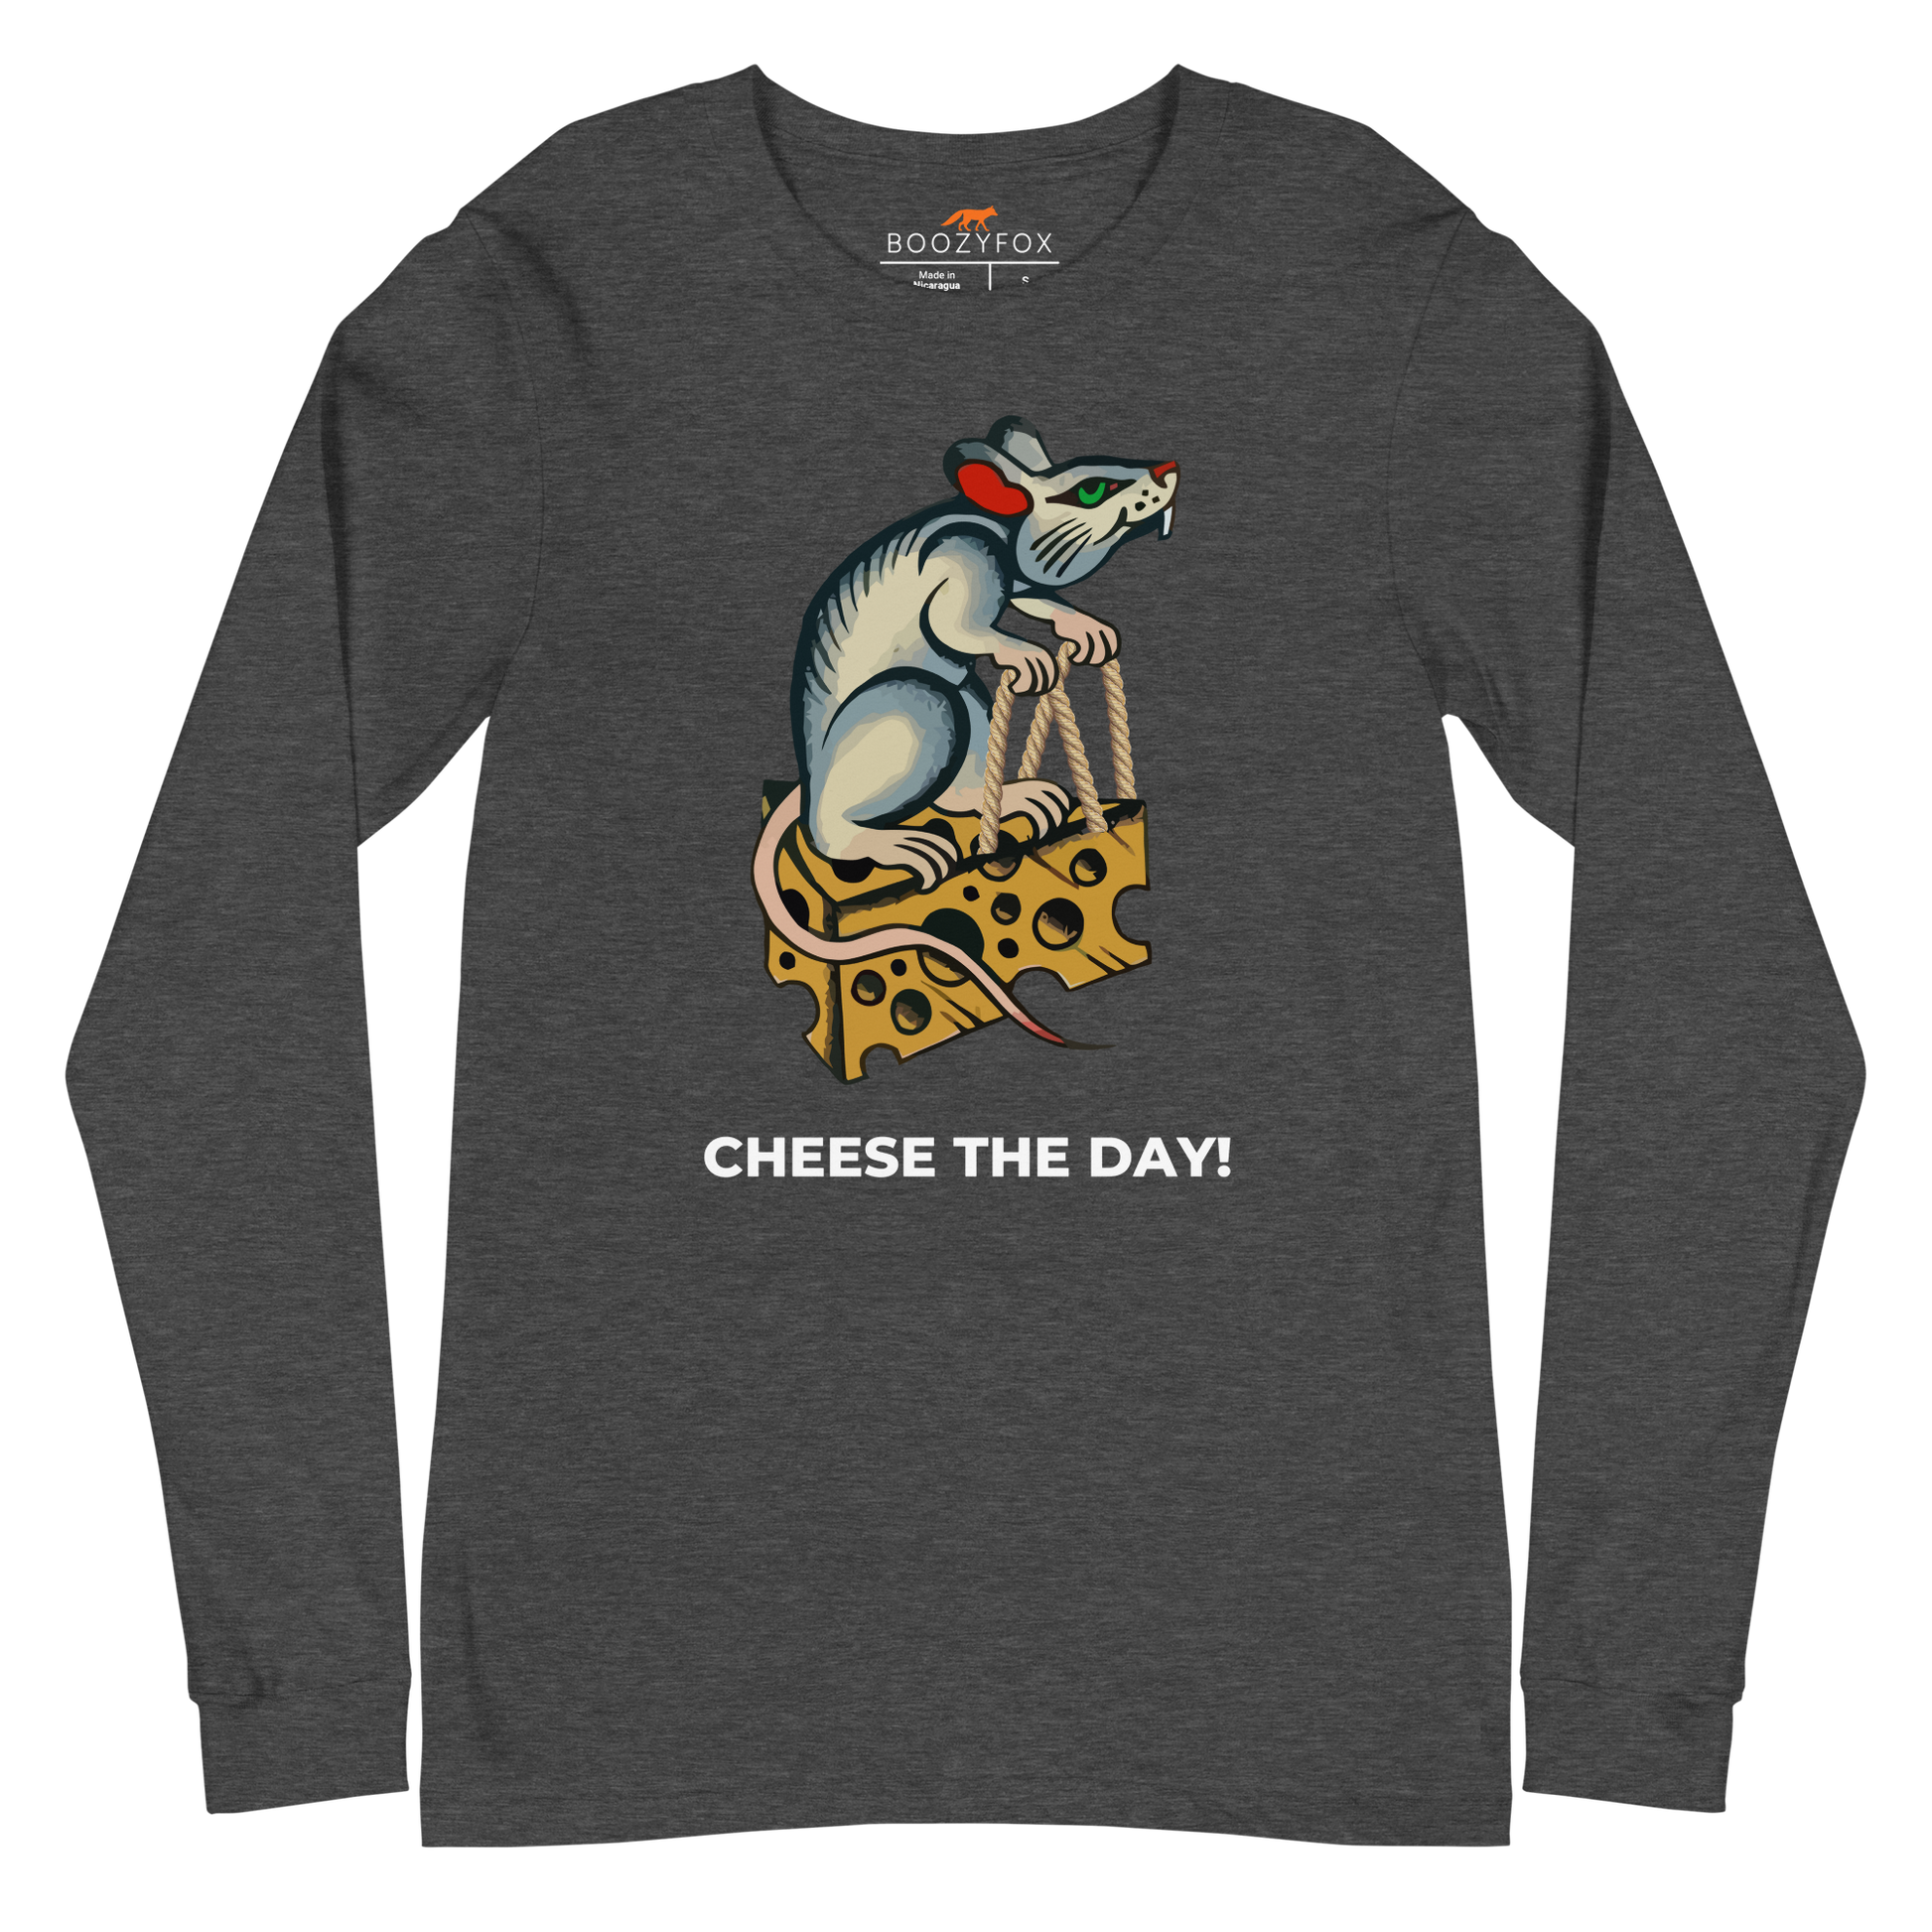 Dark Grey Heather Rat Long Sleeve Tee featuring a hilarious Cheese The Day graphic on the chest - Funny Rat Long Sleeve Graphic Tees - Boozy Fox